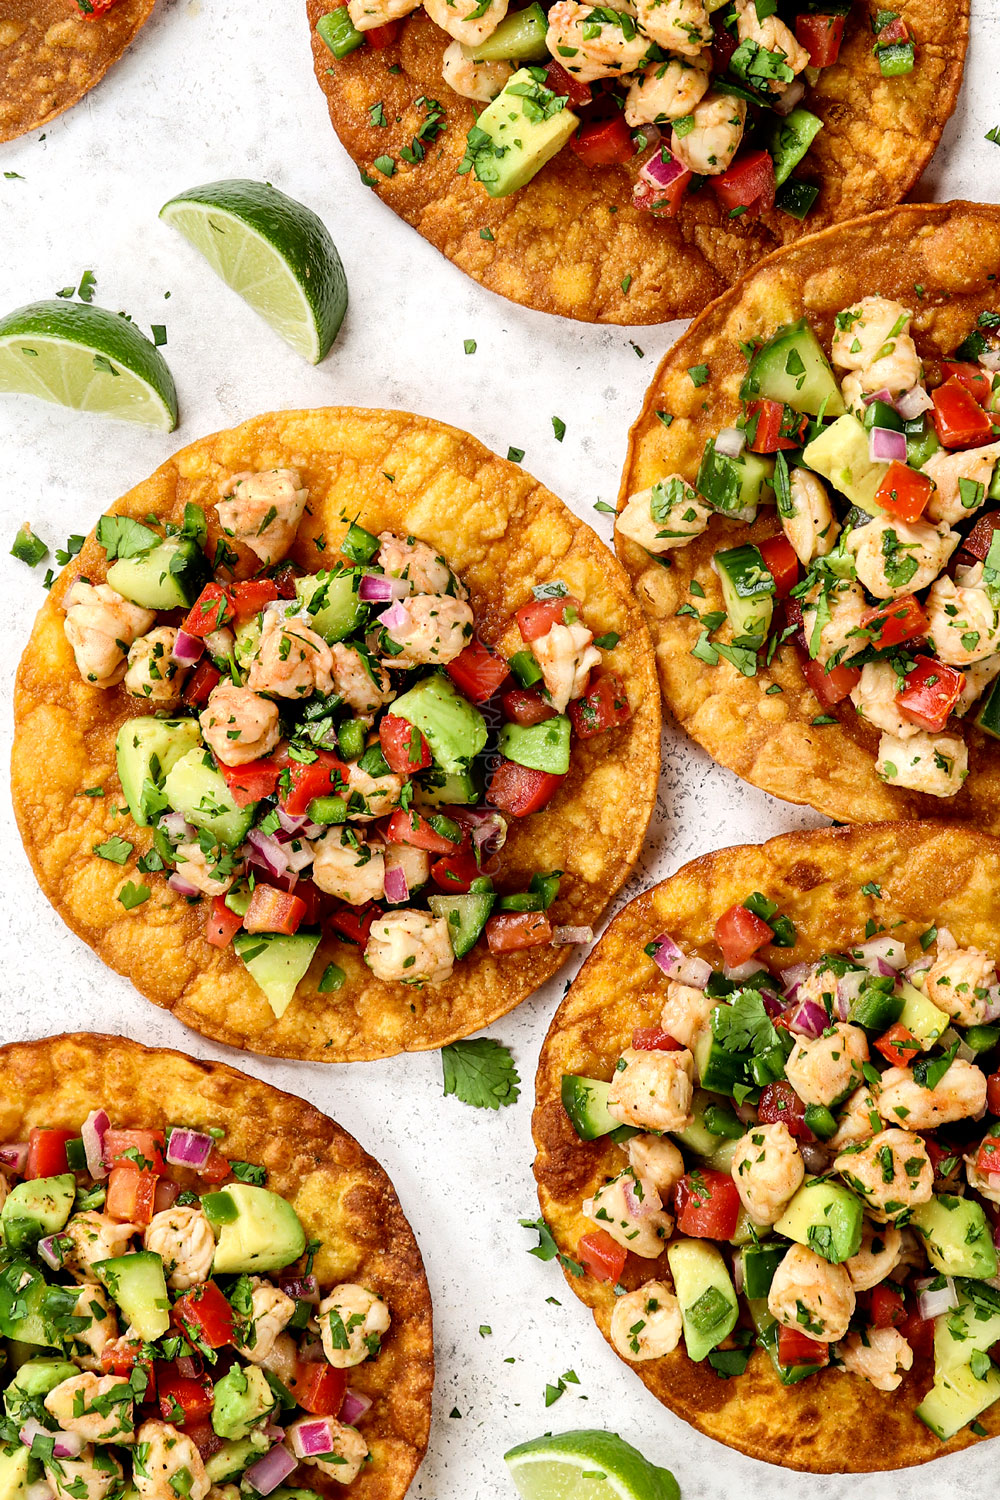 showing how to serve ceviche de camaron (shrimp ceviche) by topping tostadas with ceviche